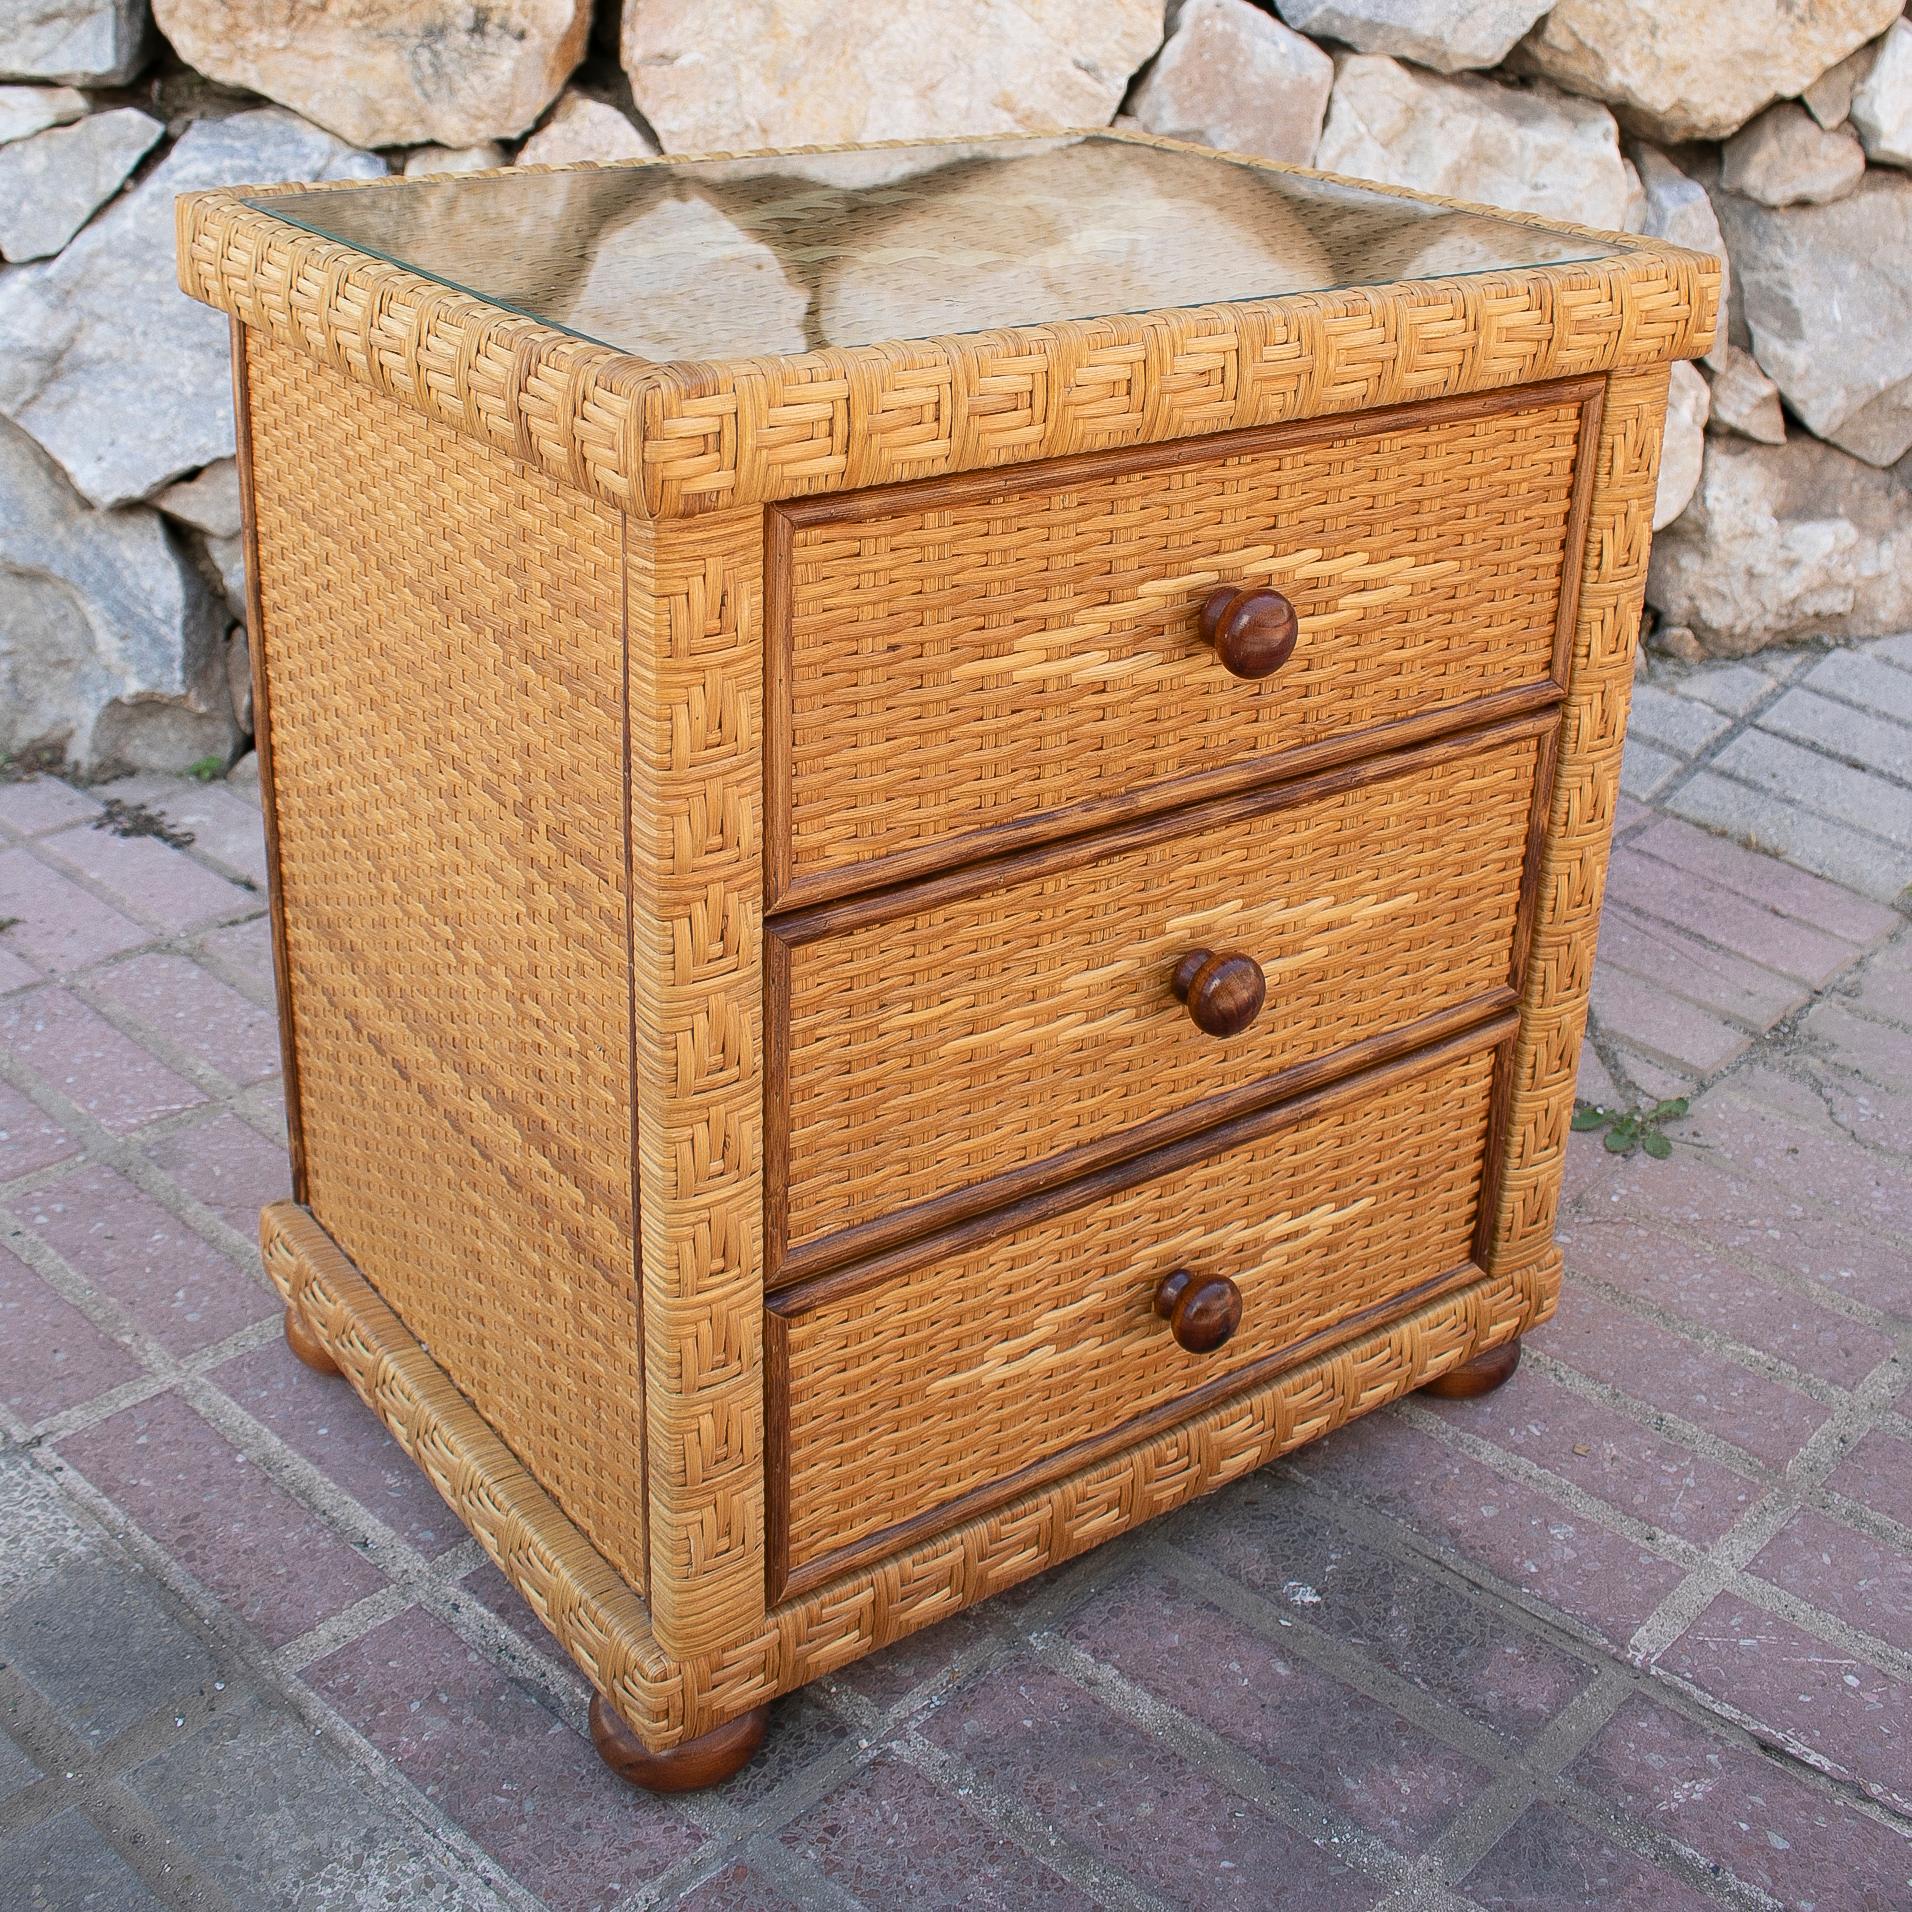 1970s Spanish 3-drawer lace wicker side table.
 